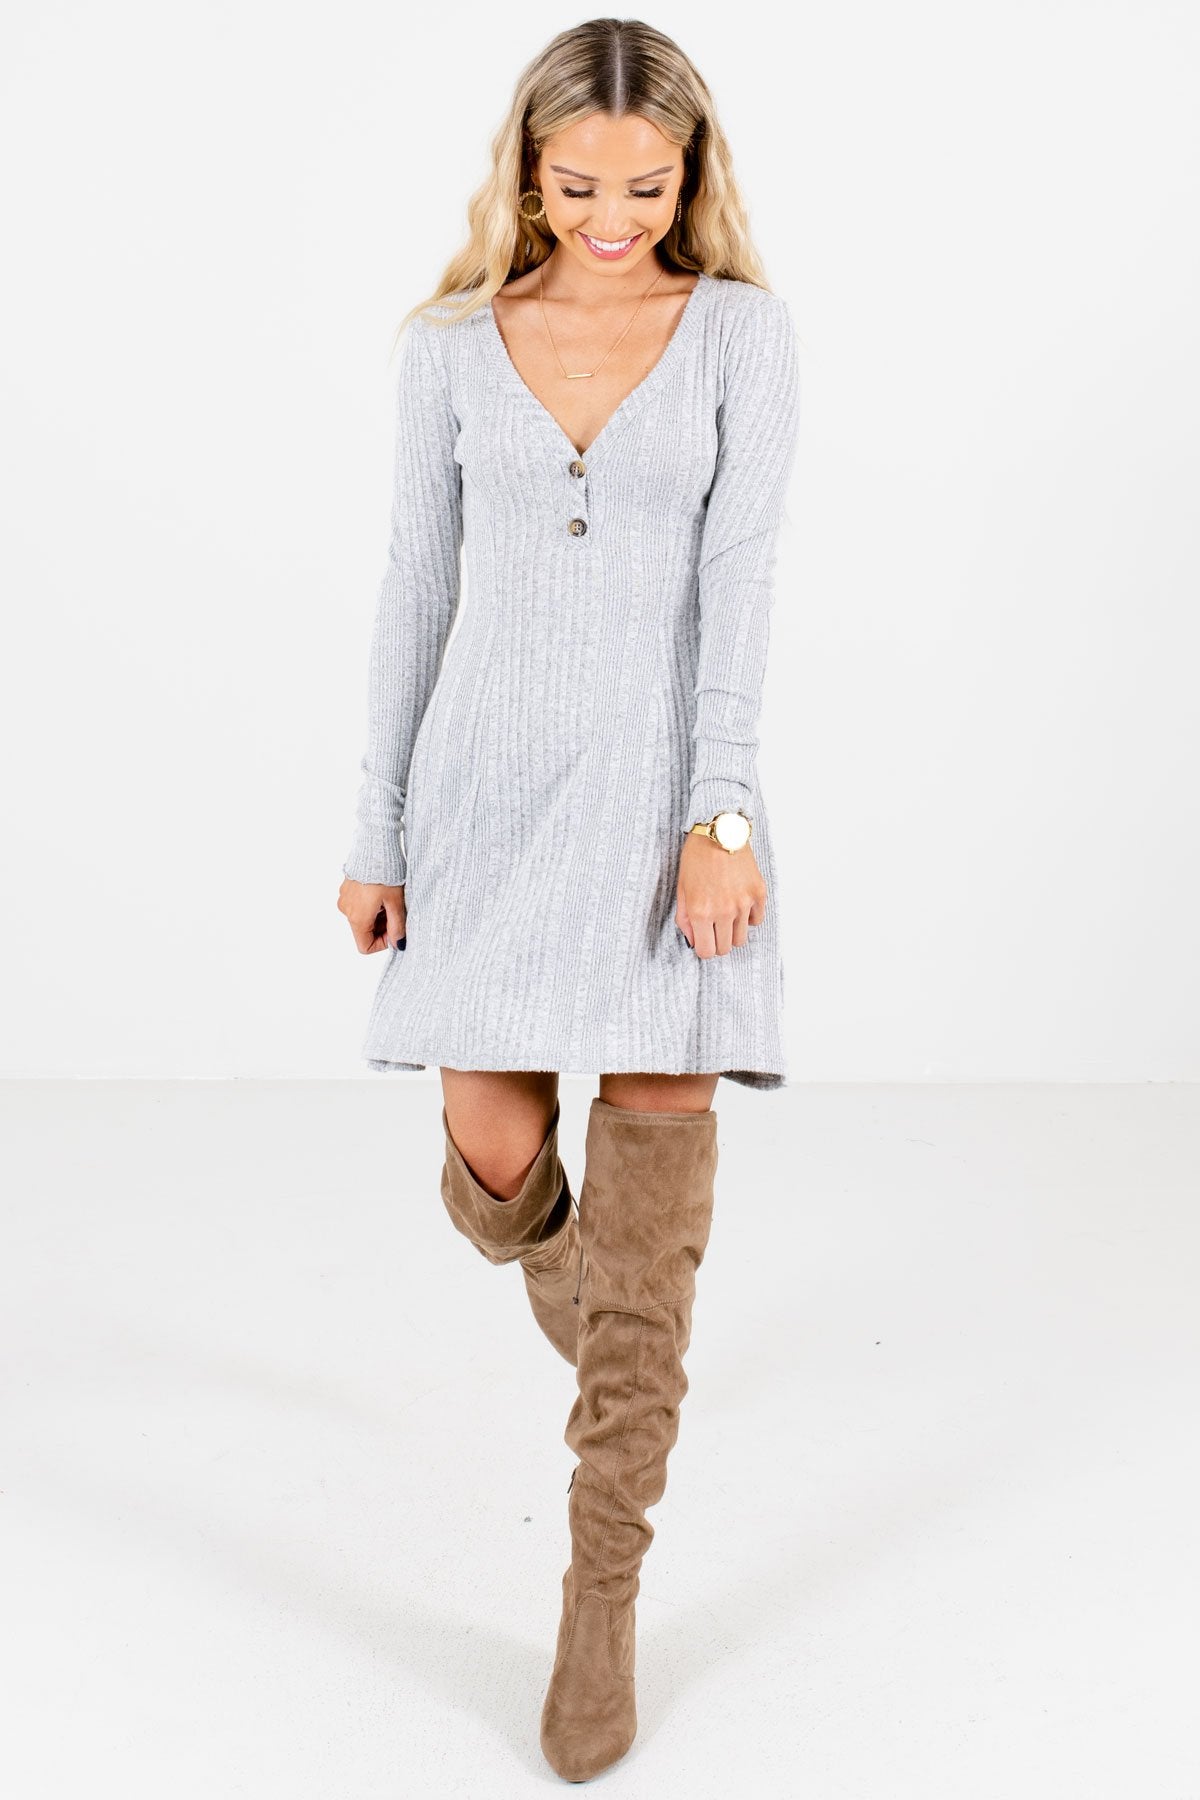 Heather Gray Cute and Comfortable Boutique Mini Dresses for Women